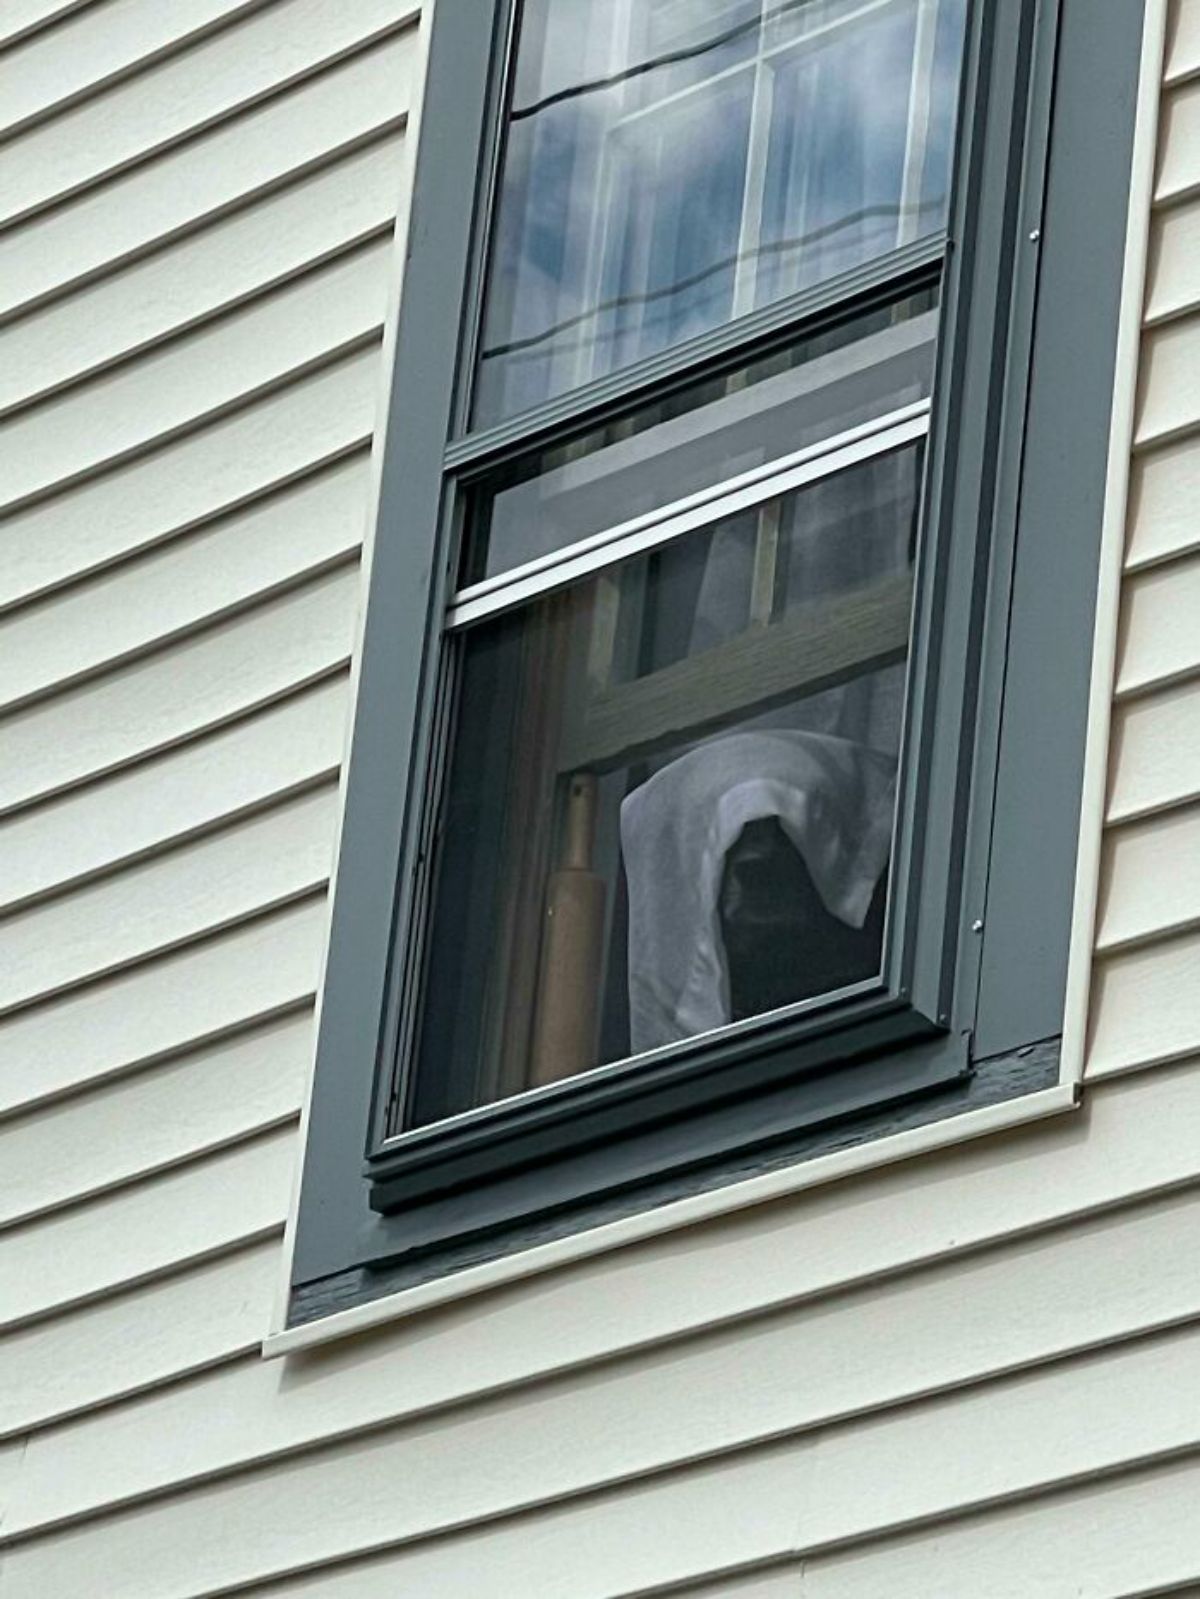 dog looking out a window with a white window covering the face except for the snout